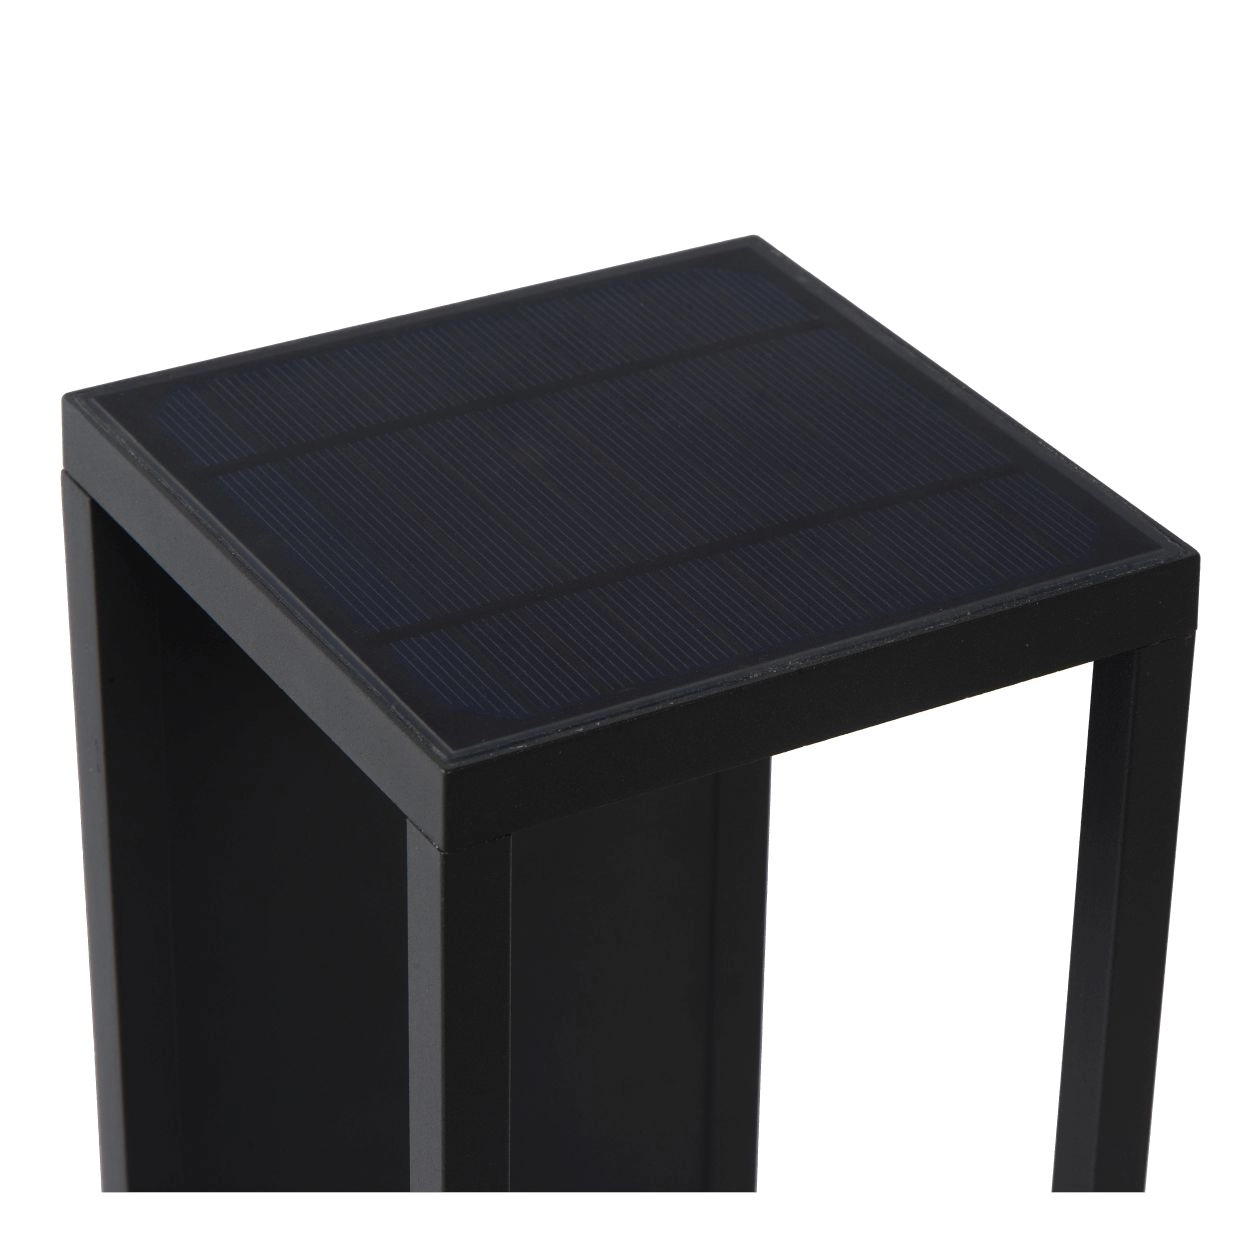 LU 27891/02/30 Lucide TENSO SOLAR - Wall light Outdoor - LED - 1x2,2W 3000K - IP54 - Anthracite